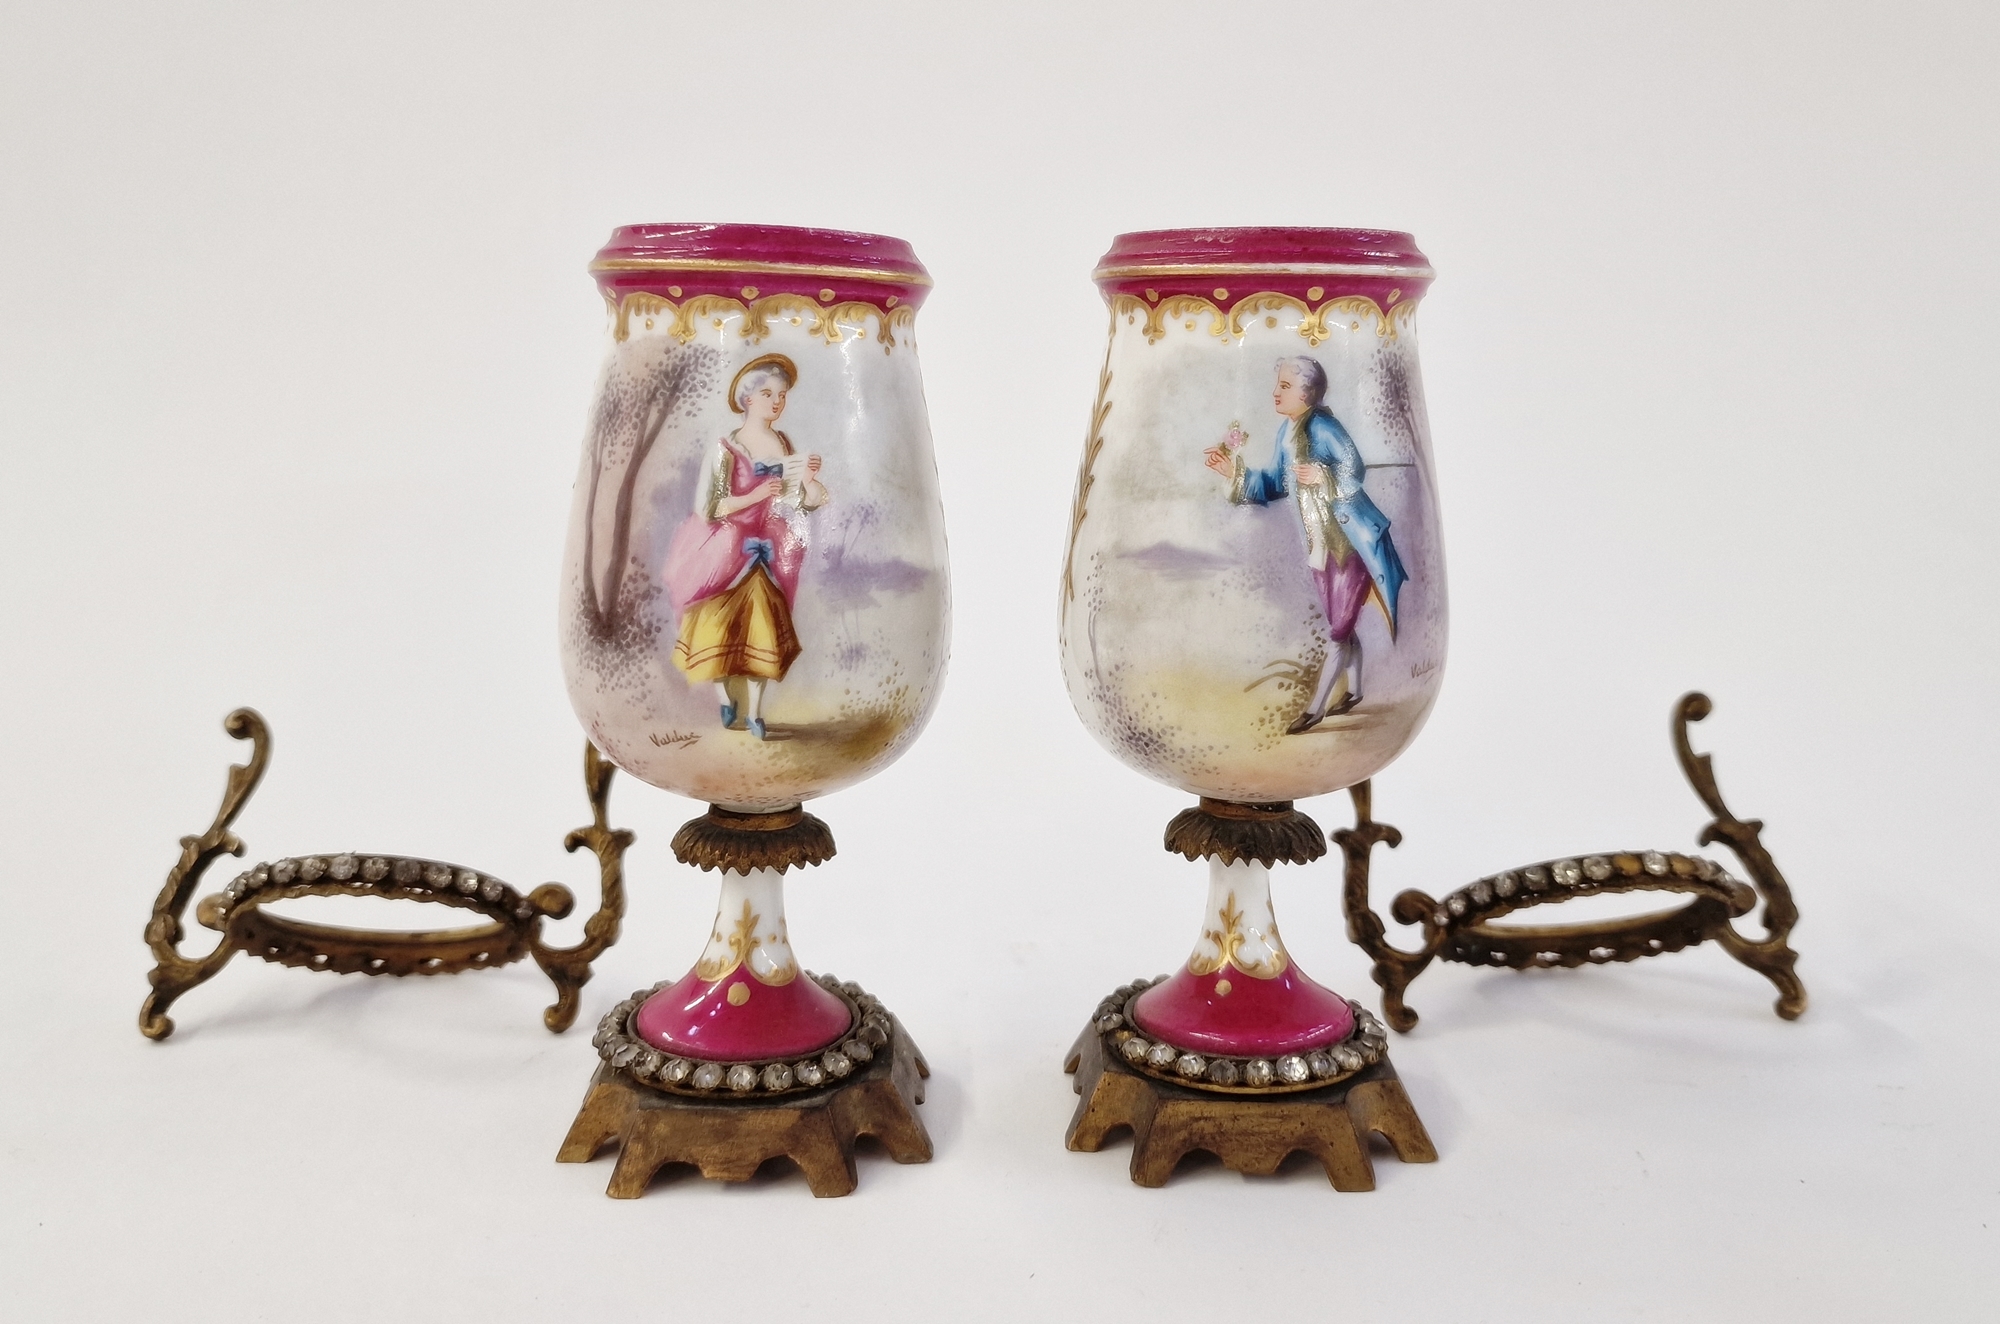 Pair of late 19th century gilt metal-mounted Sevres-style vases, spurious interlaced L marks, each - Image 4 of 4